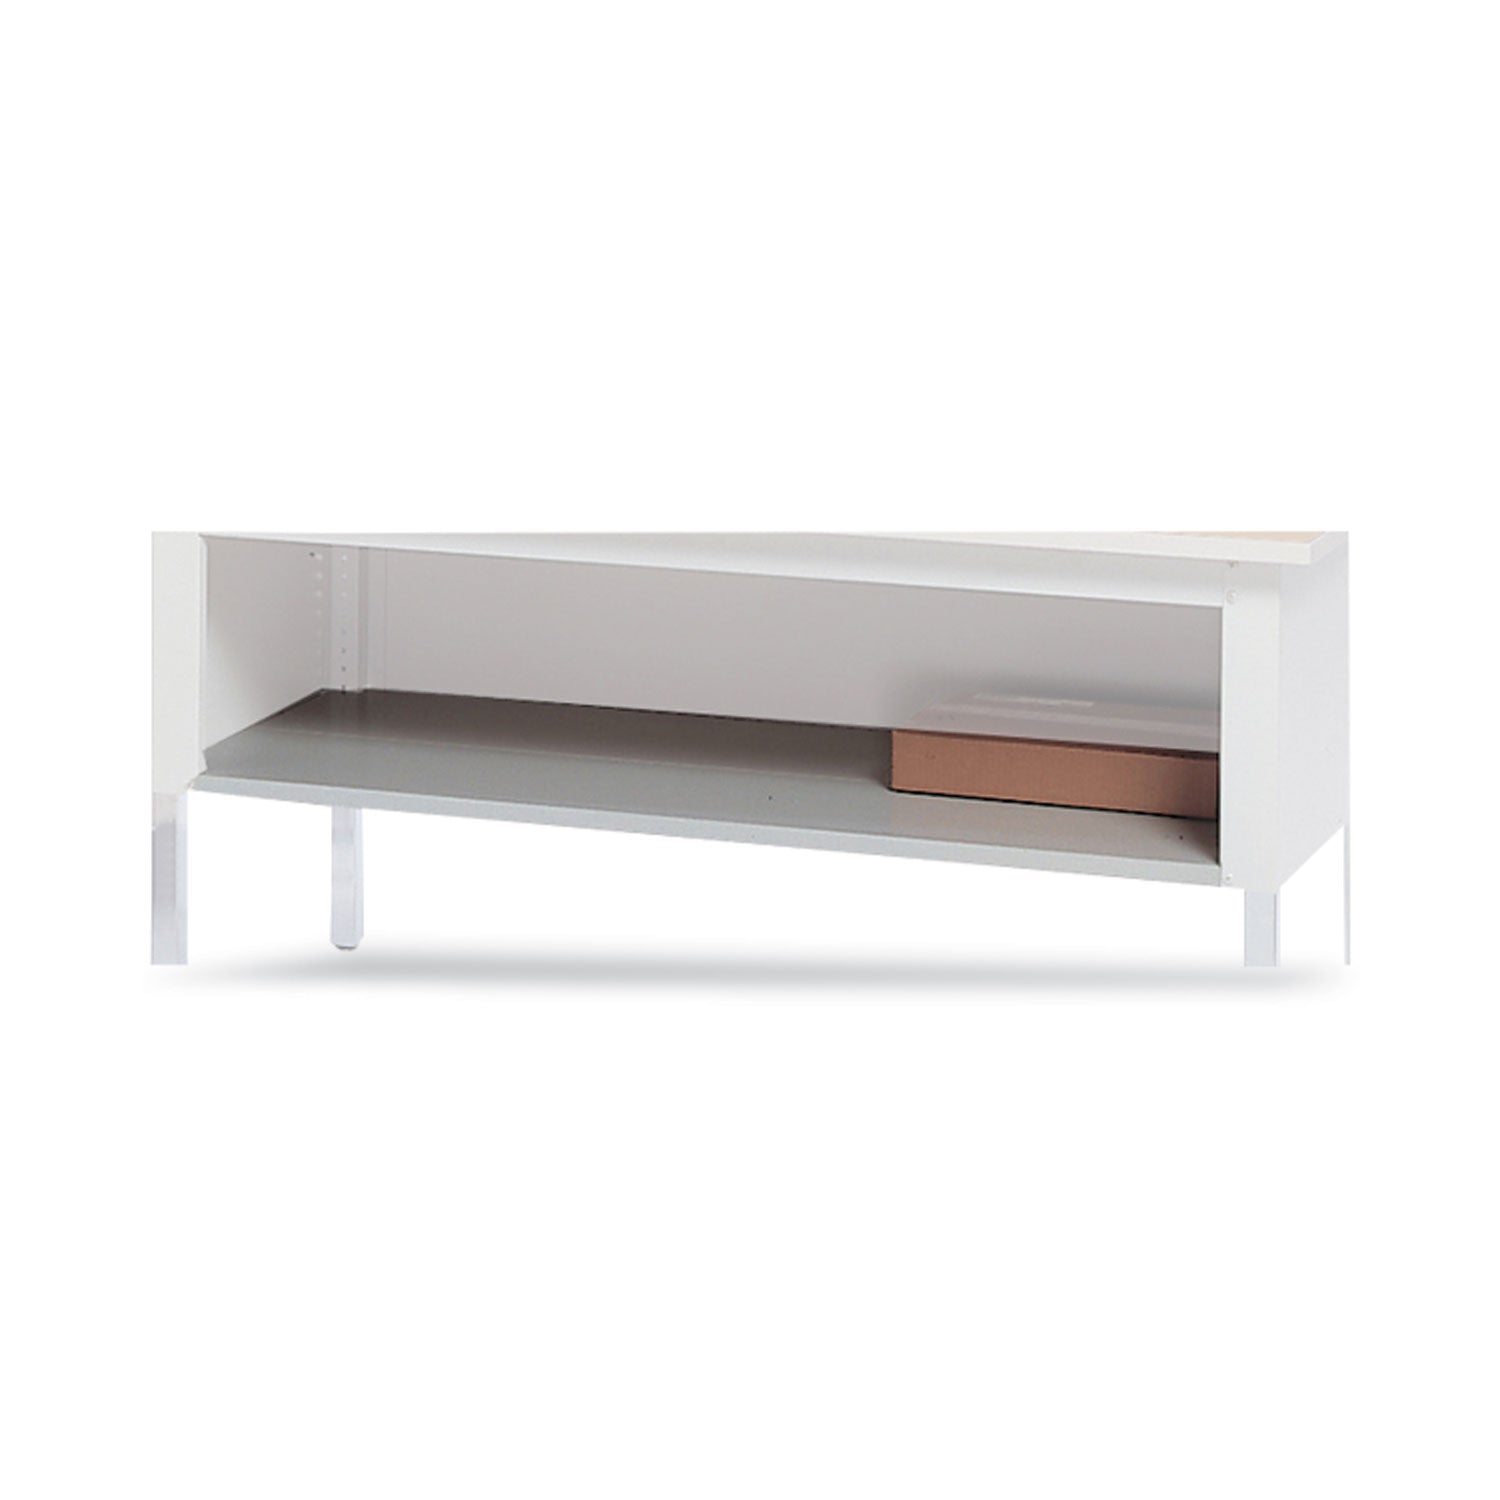 Kwik-File Mailflow-To-Go Shelf for 60" Wide Table, 56w x 25.5d, Pebble Gray - 